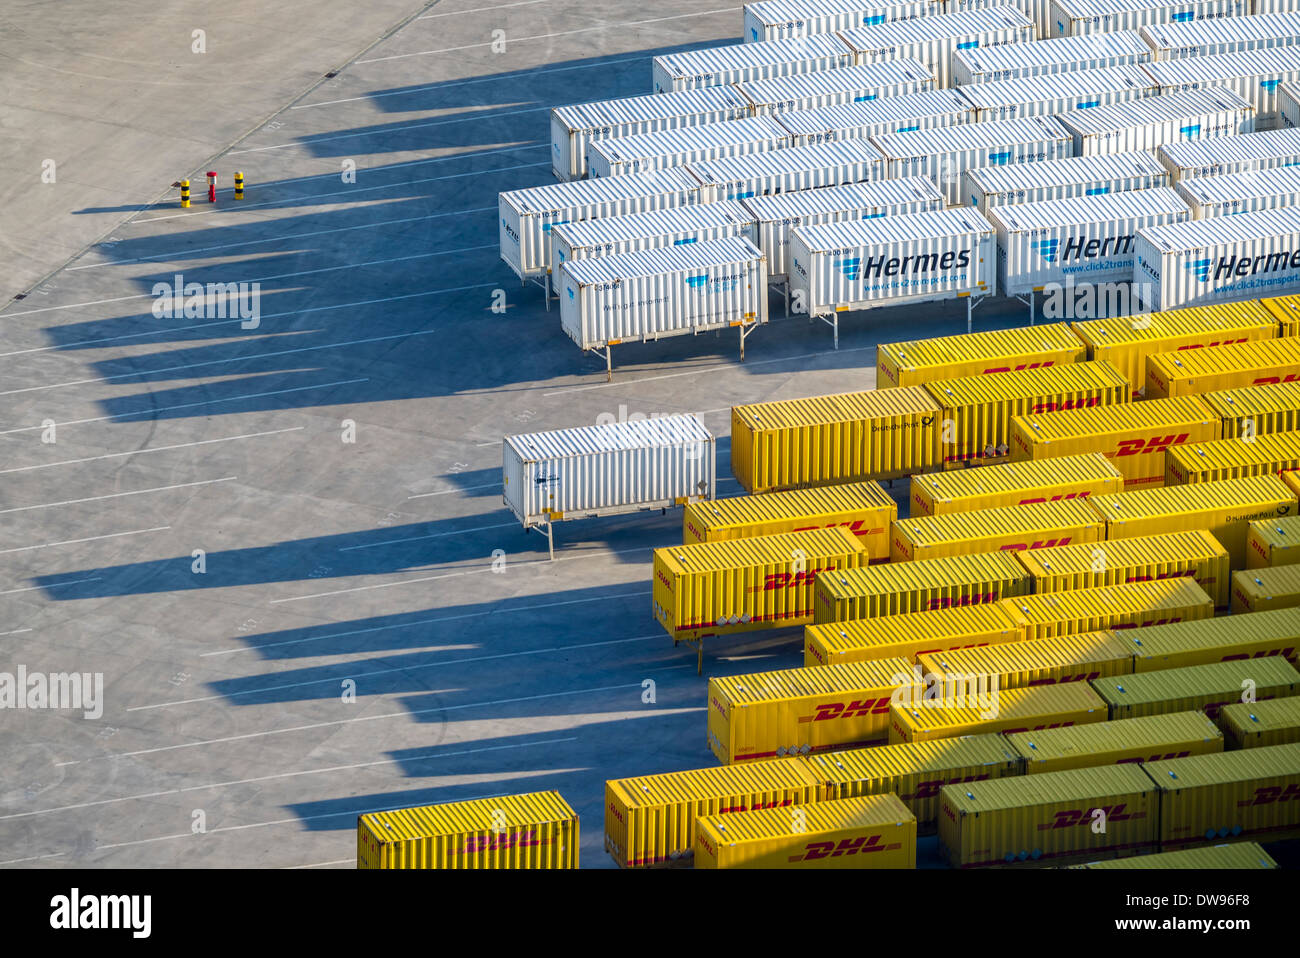 Aerial view, DHL and Hermes containers in the port of Hamm, North Rhine-Westphalia, Germany Stock Photo